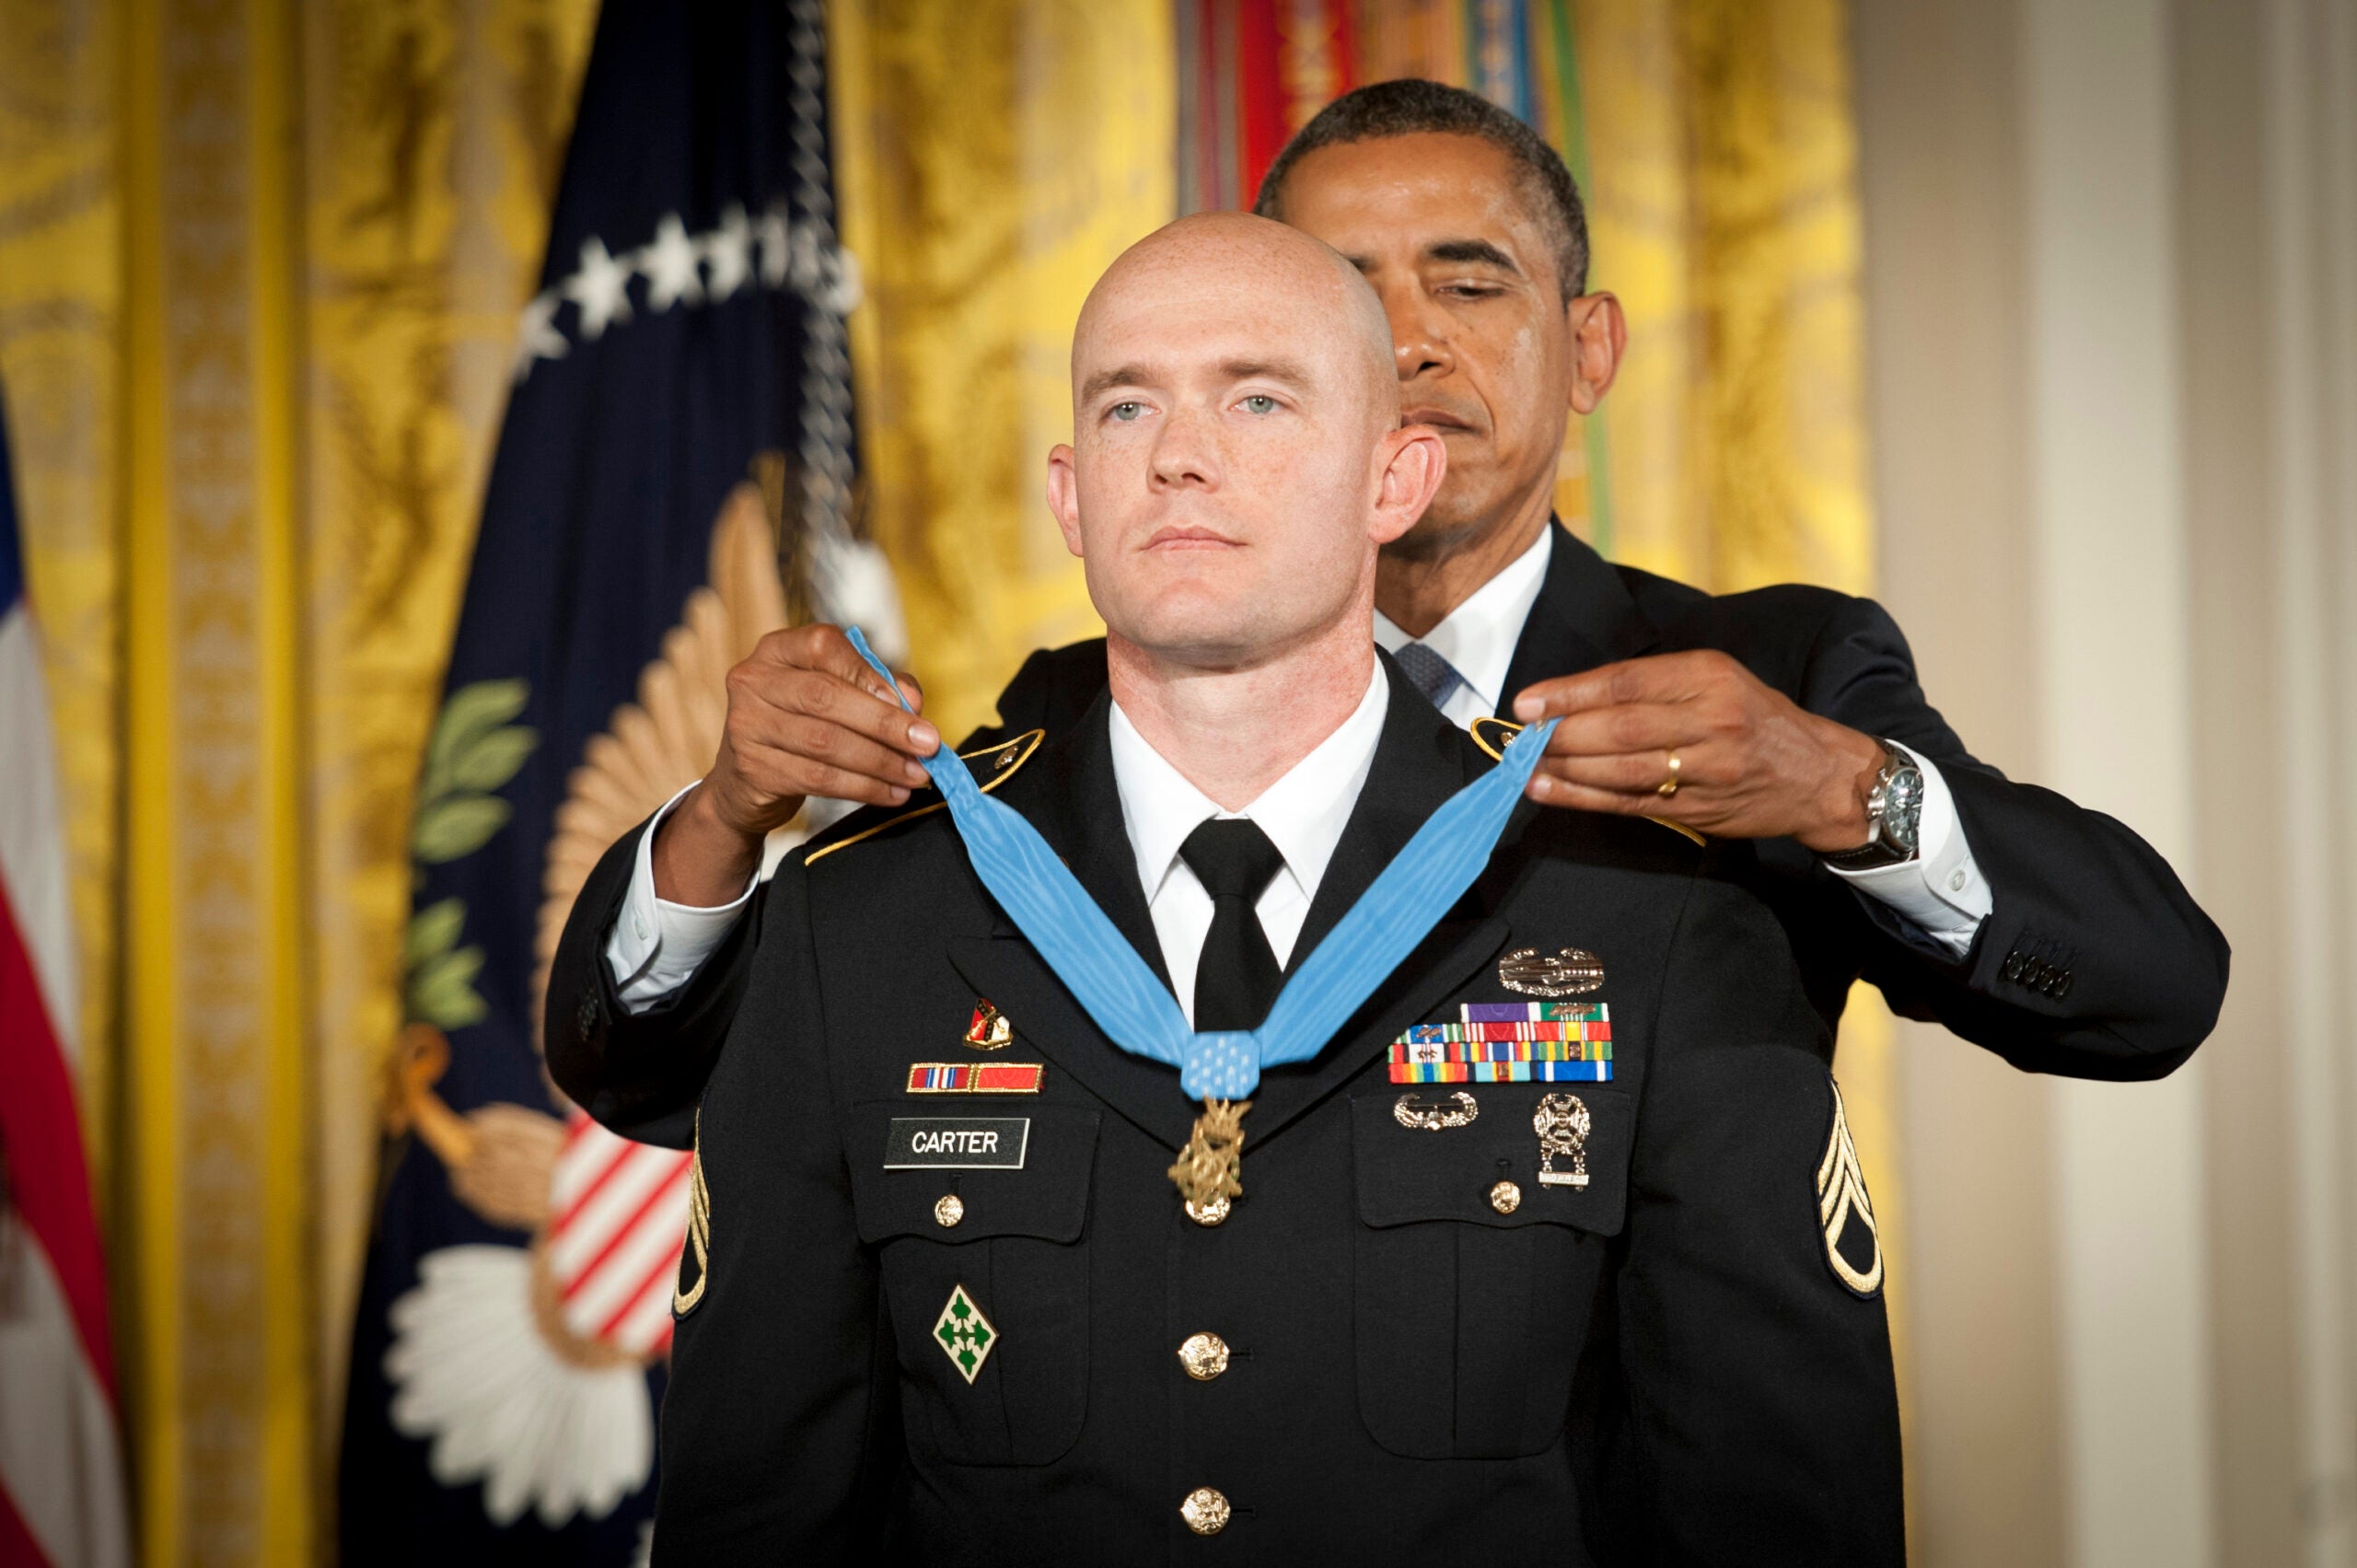 ty carter receiving medal of honor